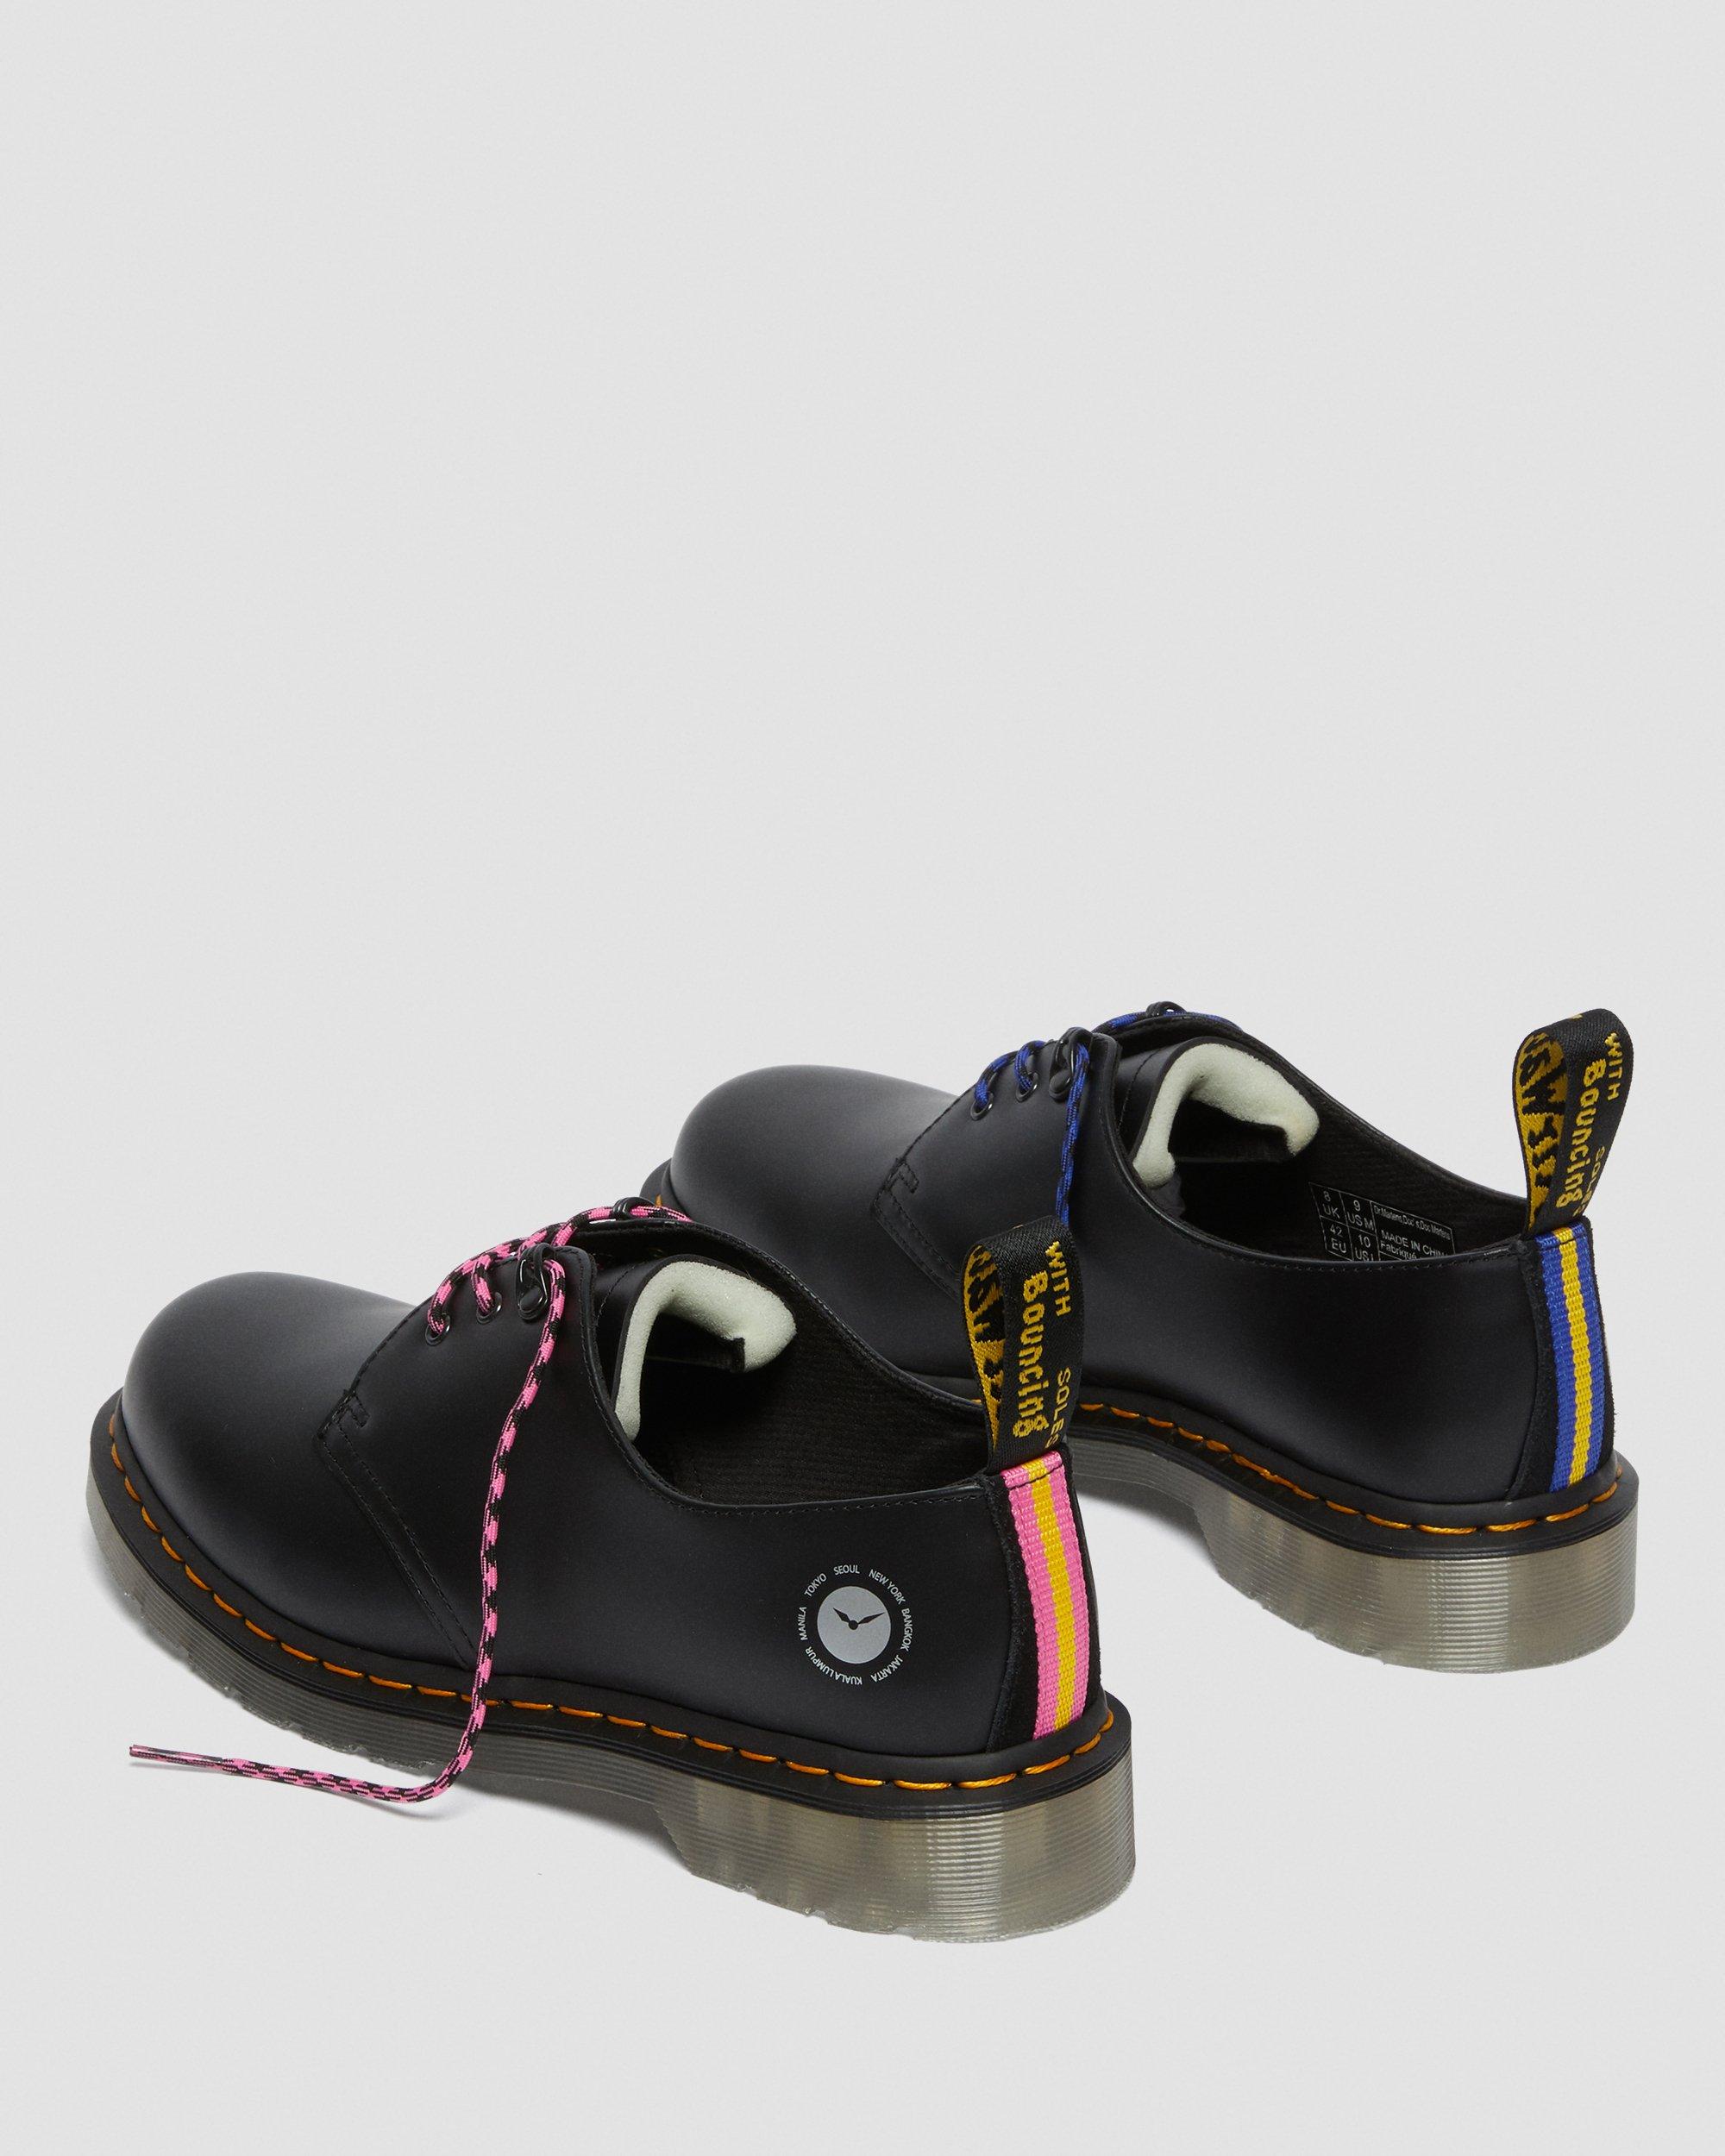 DR MARTENS 1461 Atmos Leather Oxford Shoes